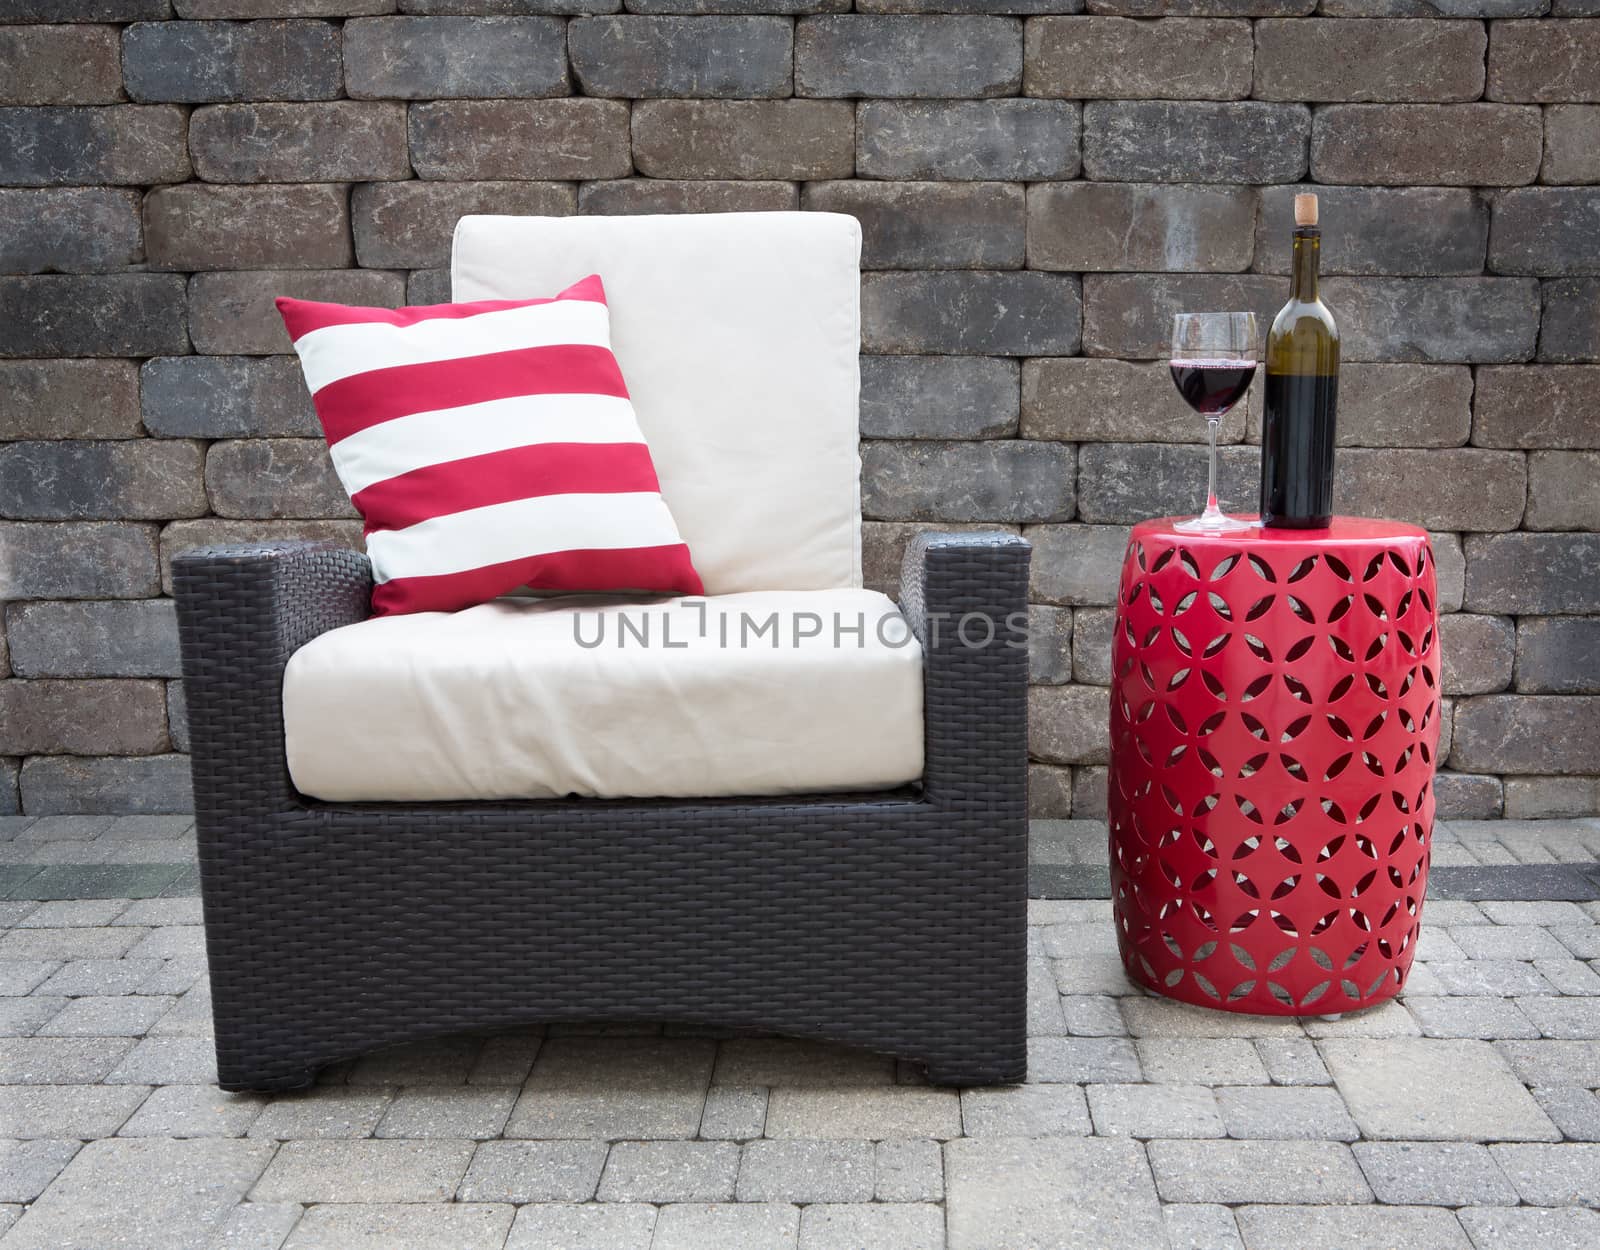 Comfortable Dark Wicker Patio Chair Outfitted with Plush Cushions Beside Modern Red Table with Bottle and Glass of Red Wine on Outdoor Stone Affluent Patio